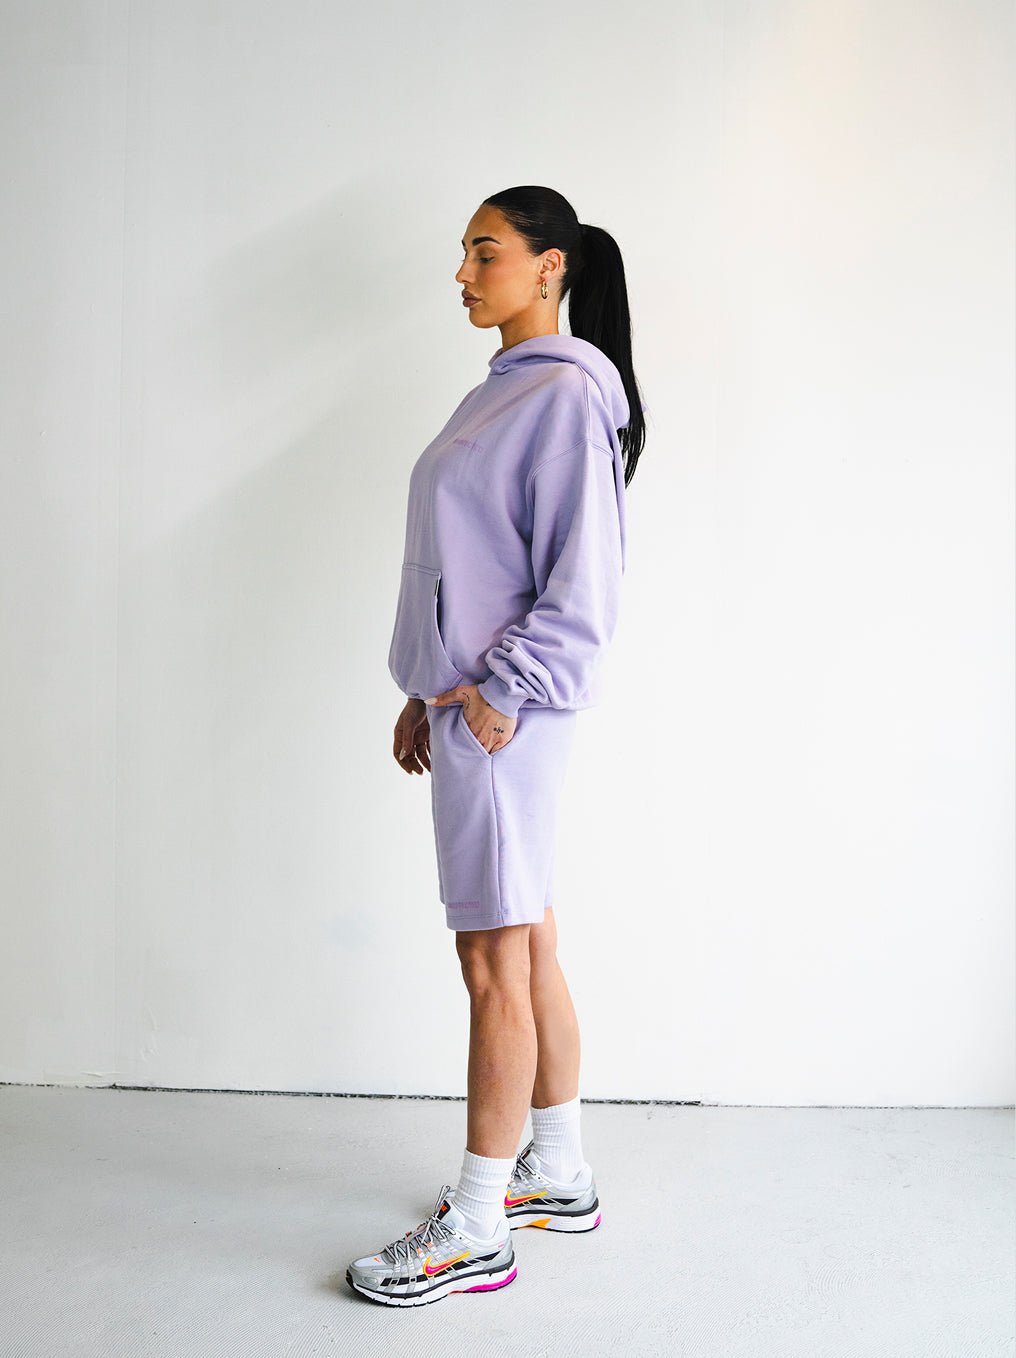 Archive Logo Baggy Sweat Shorts - Lilac - UNEFFECTED STUDIOS® - Shorts - UNEFFECTED STUDIOS®